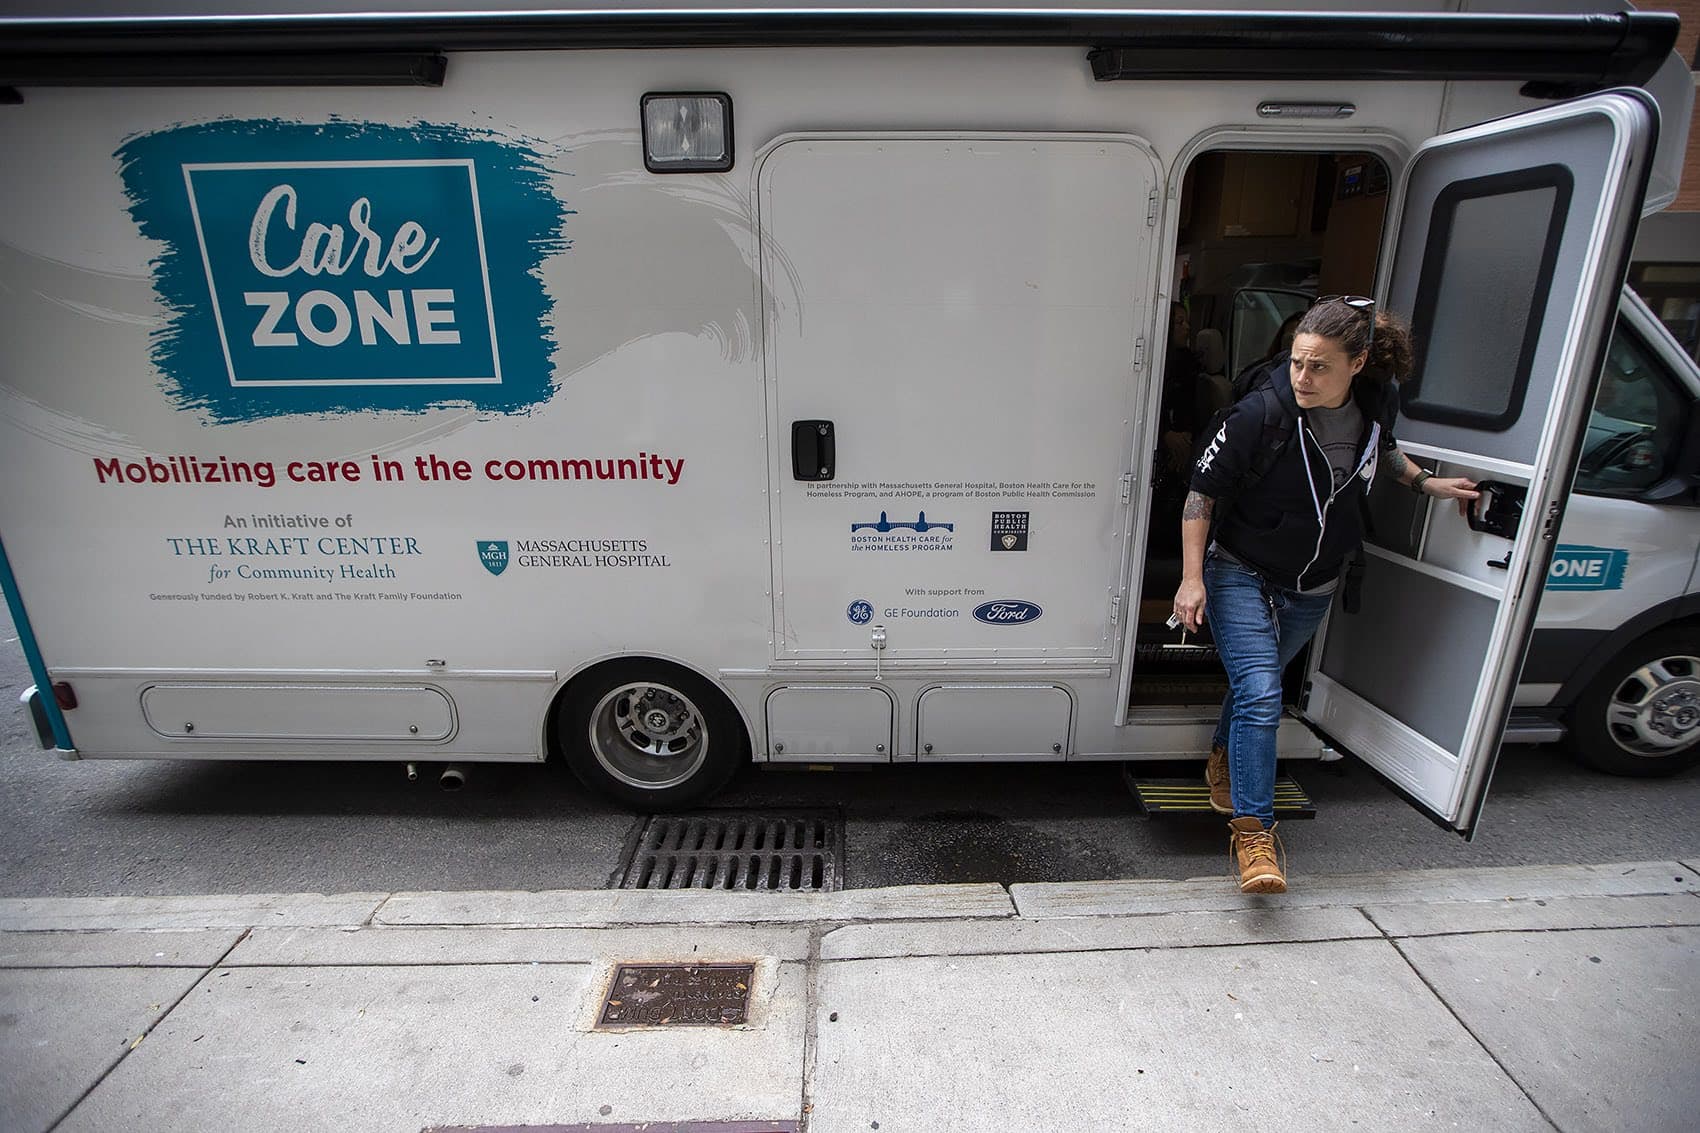 Sarah Mackin exits the Care Zone van after it parks on Haverhill Street near North Station. The outreach workers will mobilize and walk around the area to look for opioid users who need assistance. (Jesse Costa/WBUR)